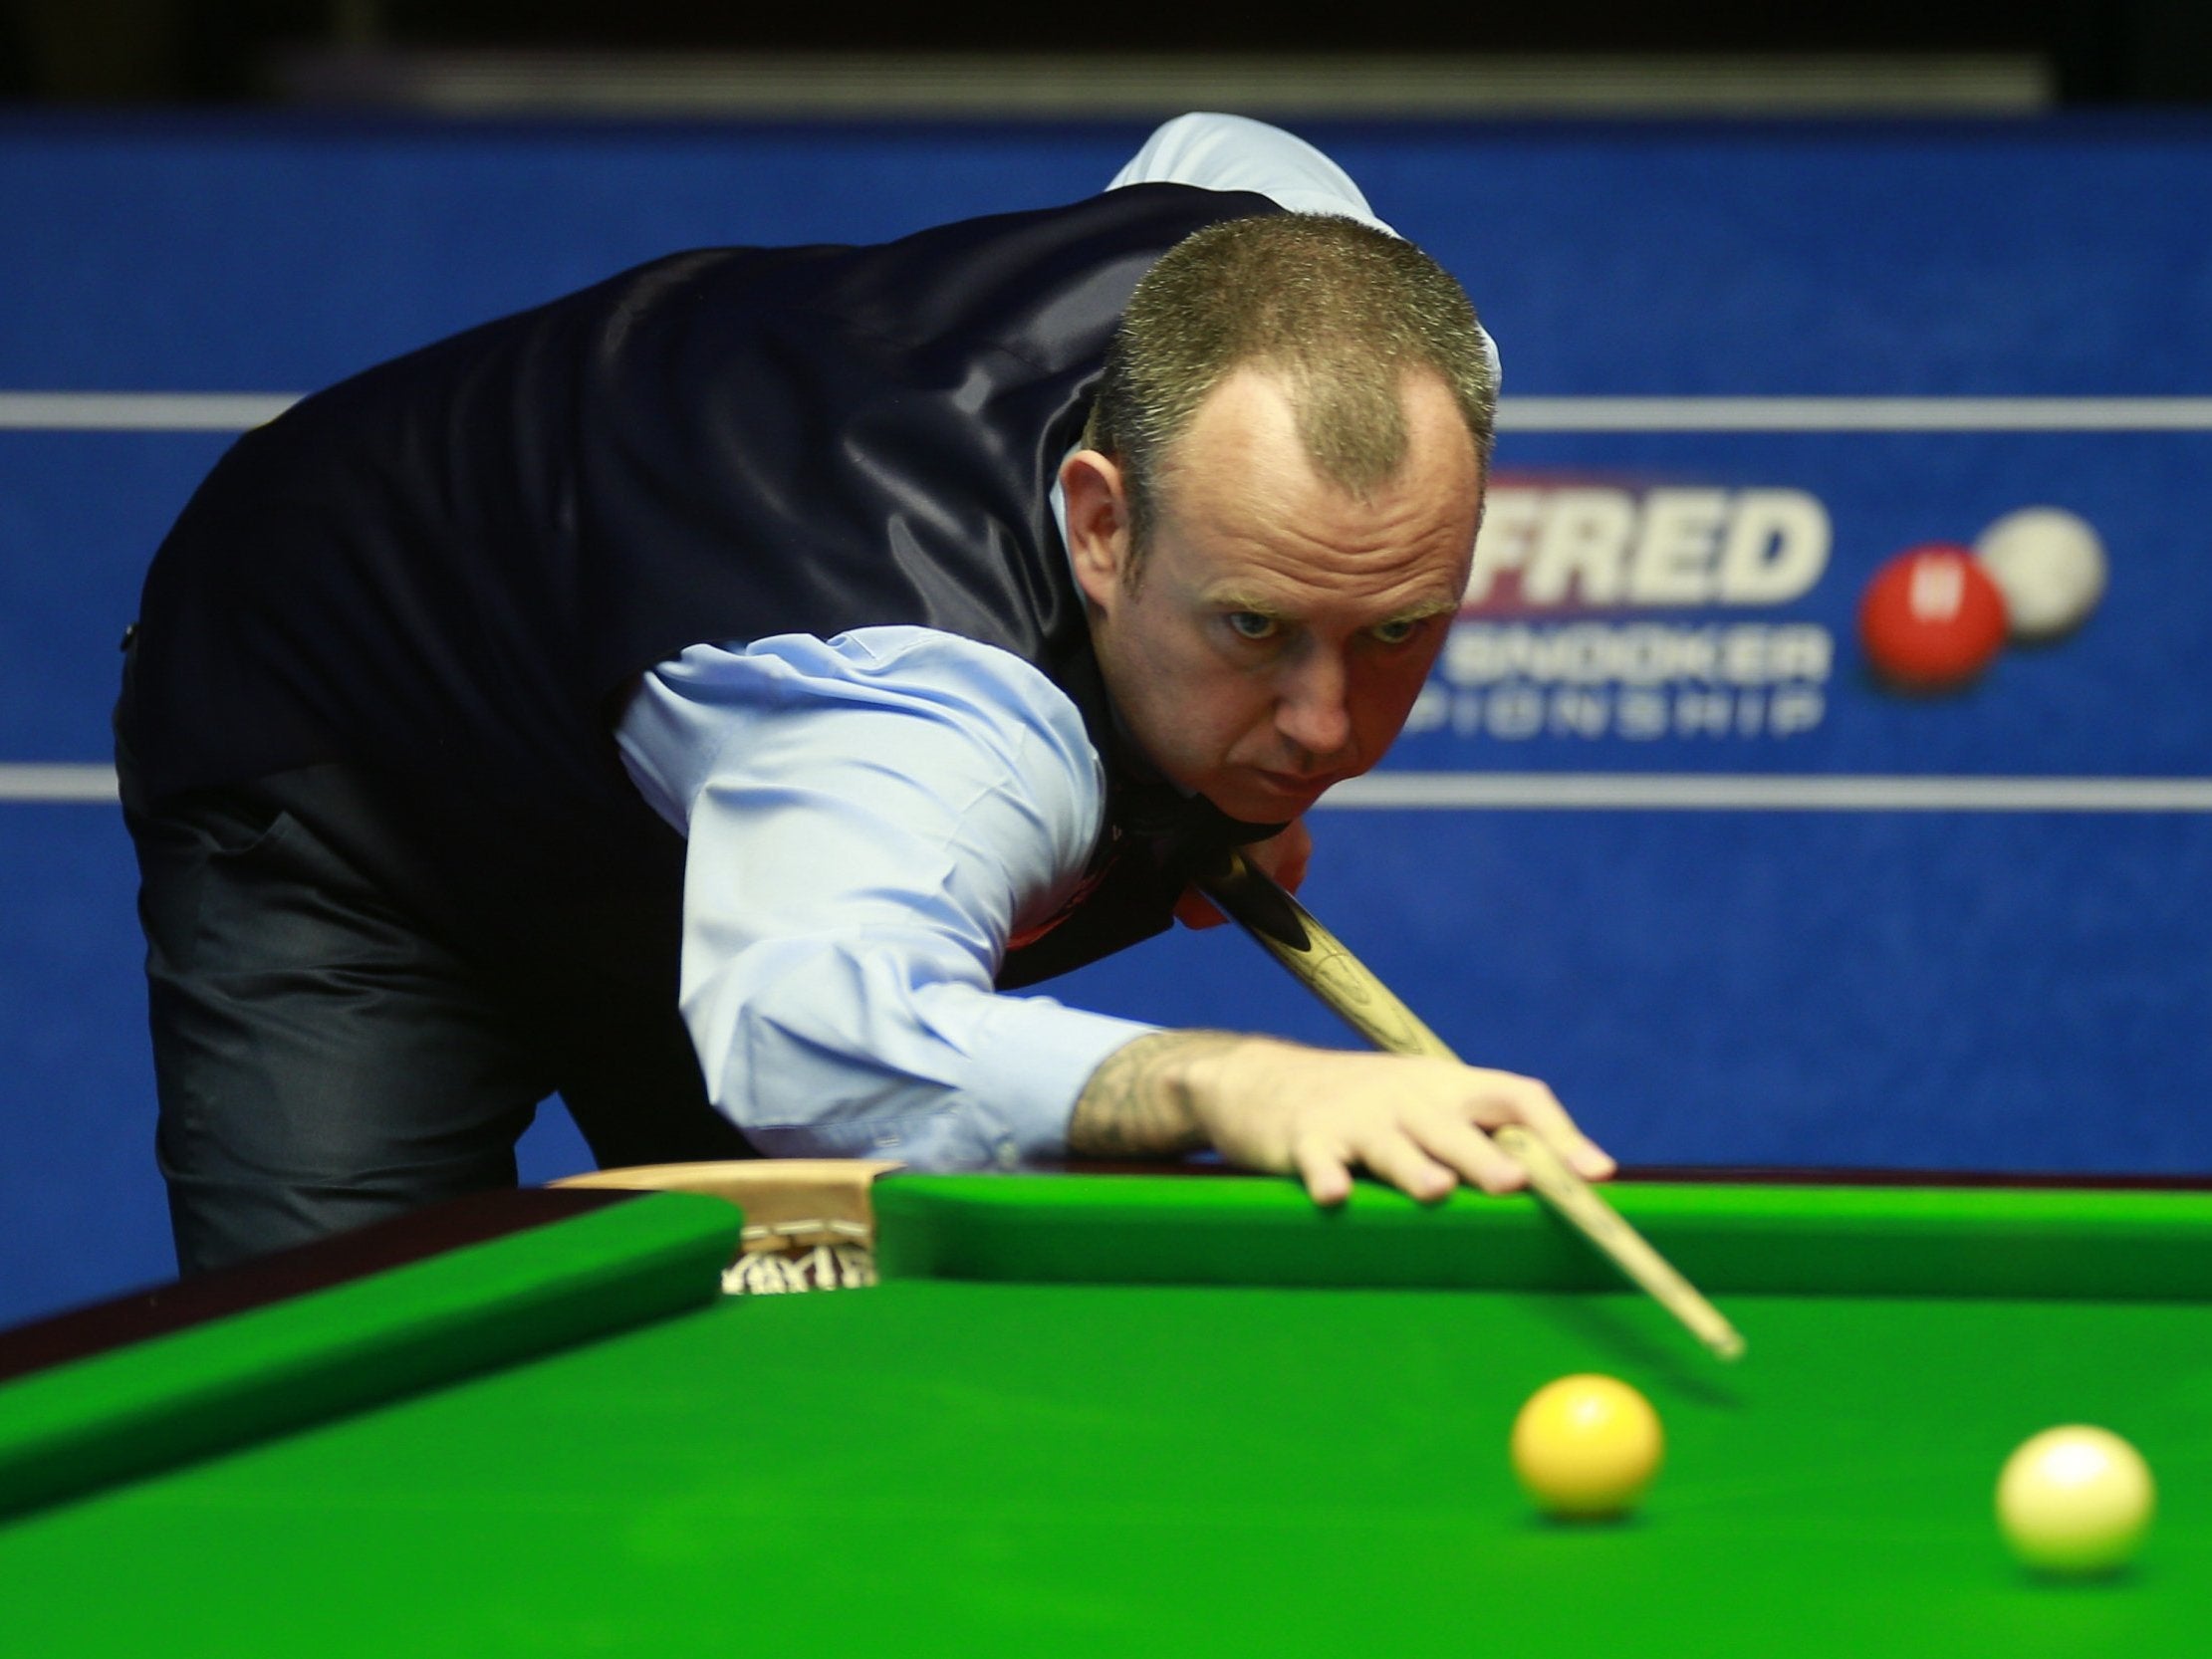 Mark Williams Defending champion rushed to hospital during second round match of World Snooker Championships The Independent The Independent